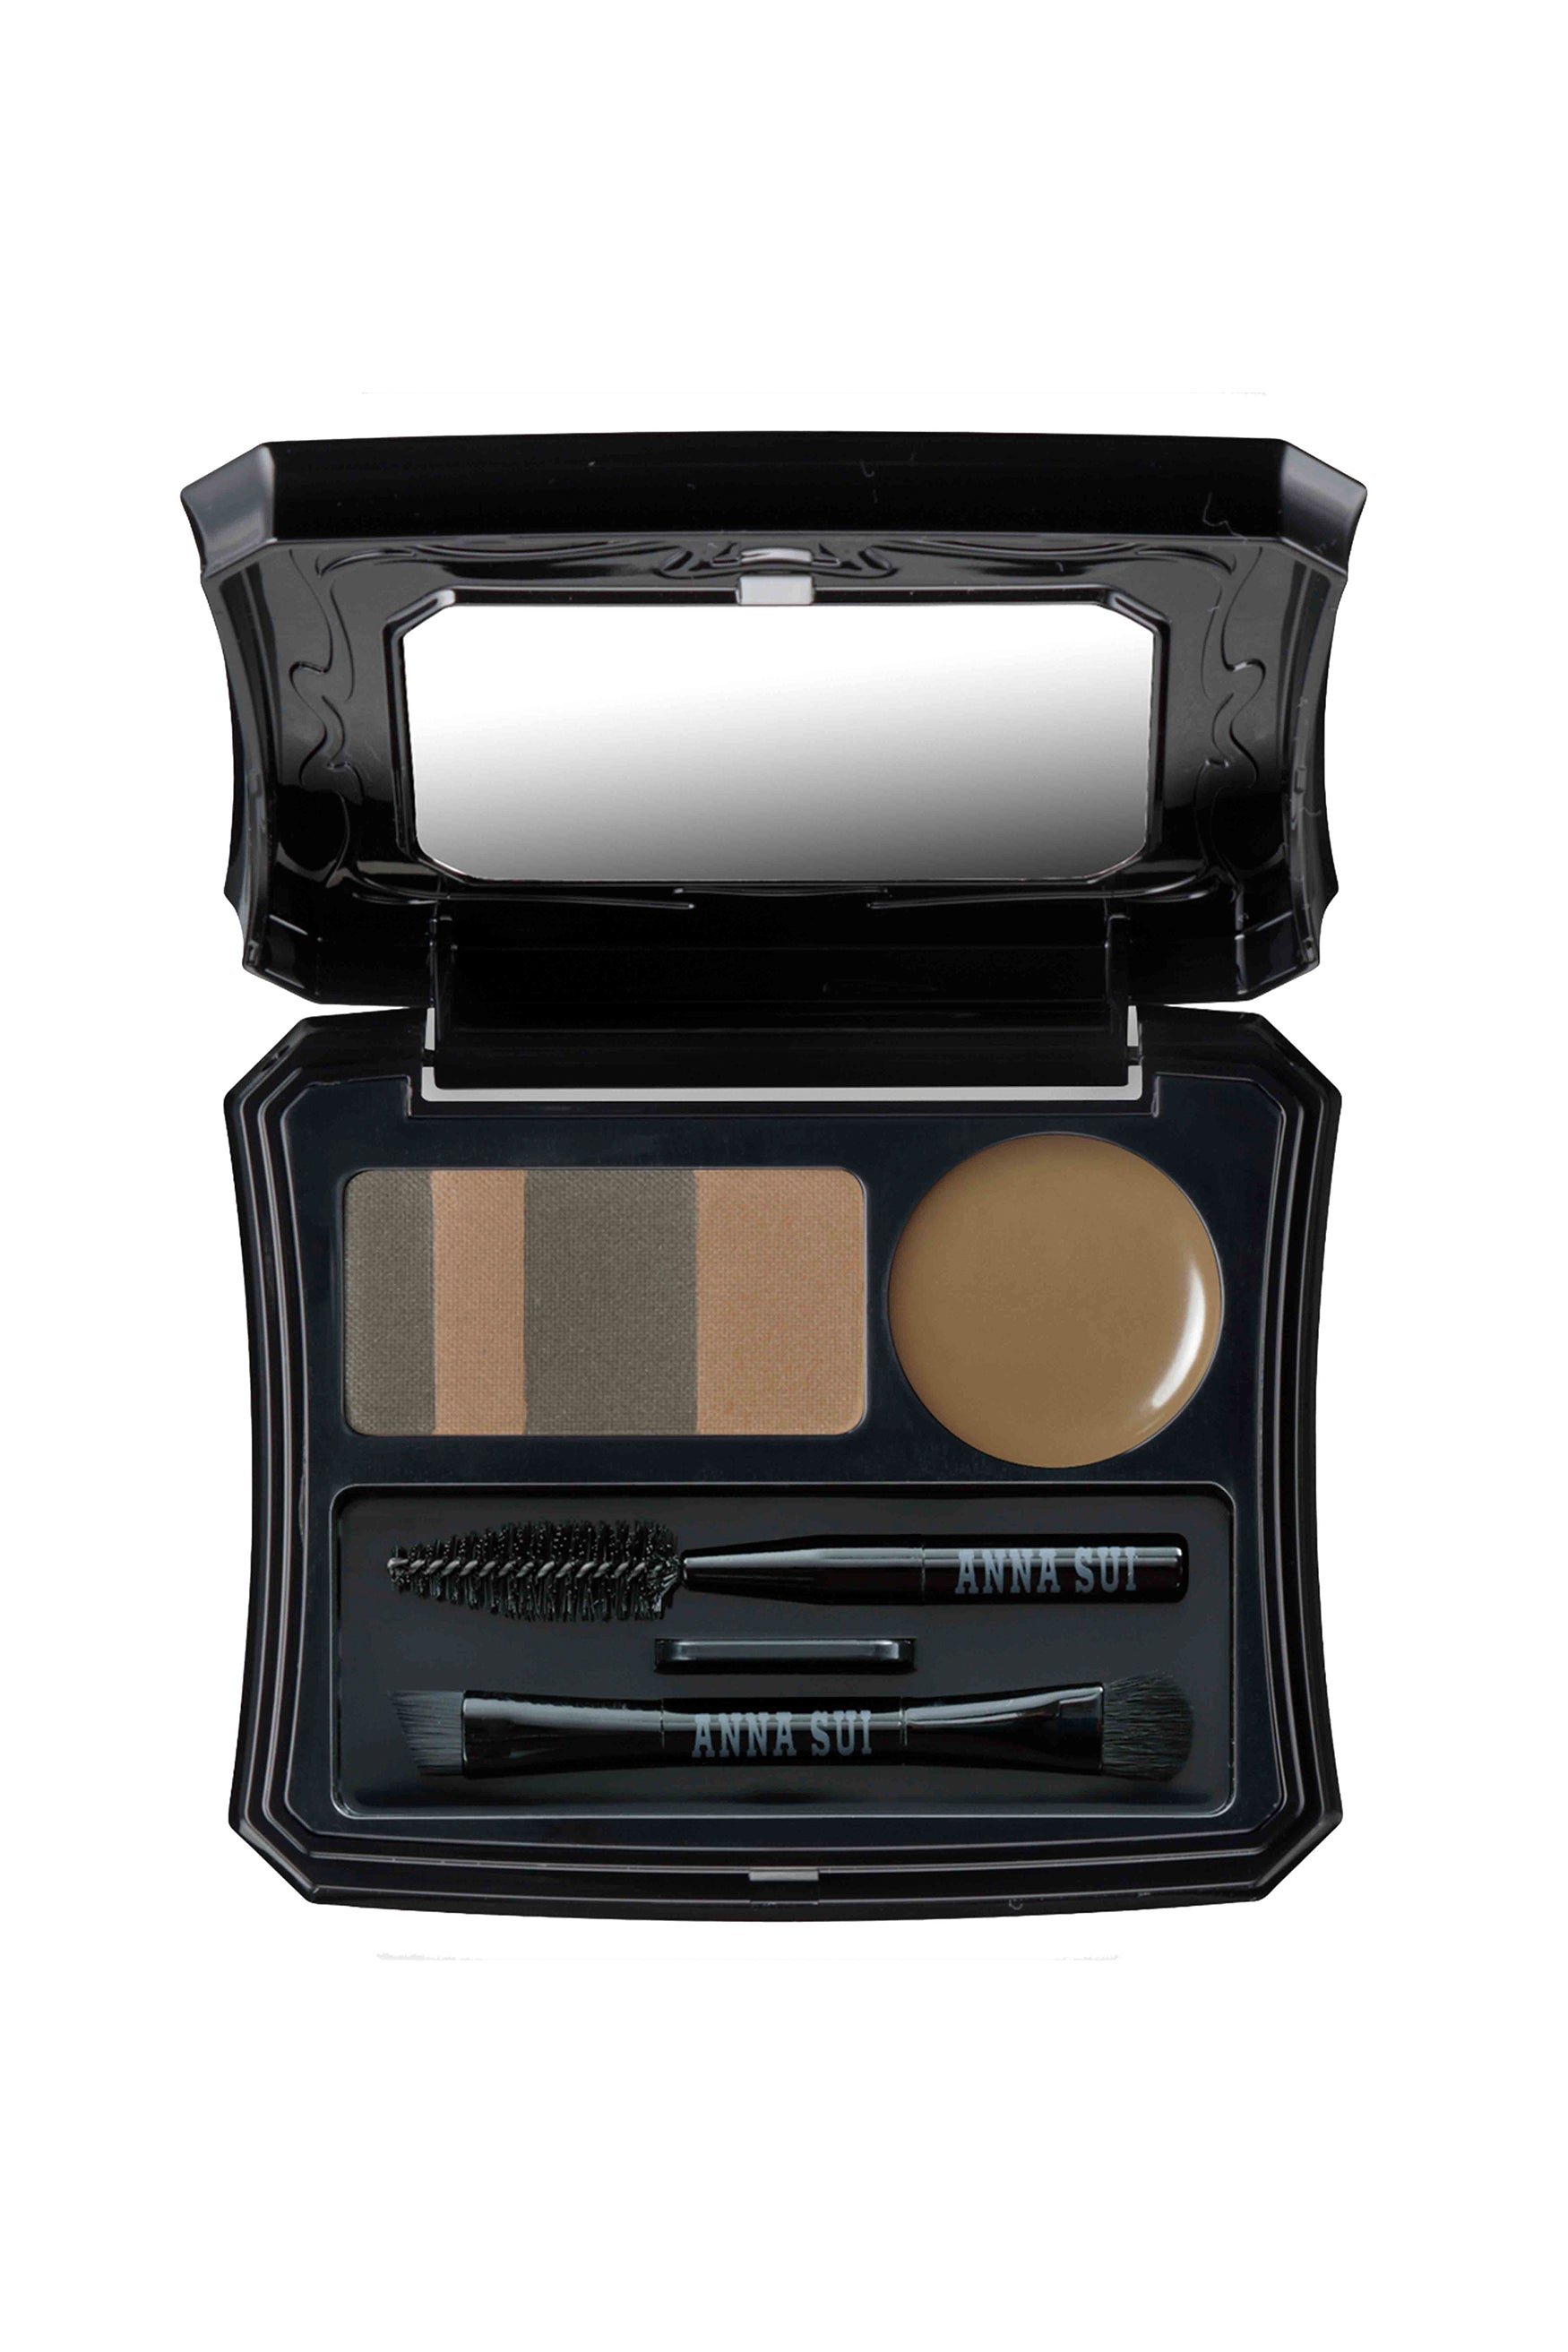 CASUAL OLIVE Designed to provide a complete brow look with this pallete alone